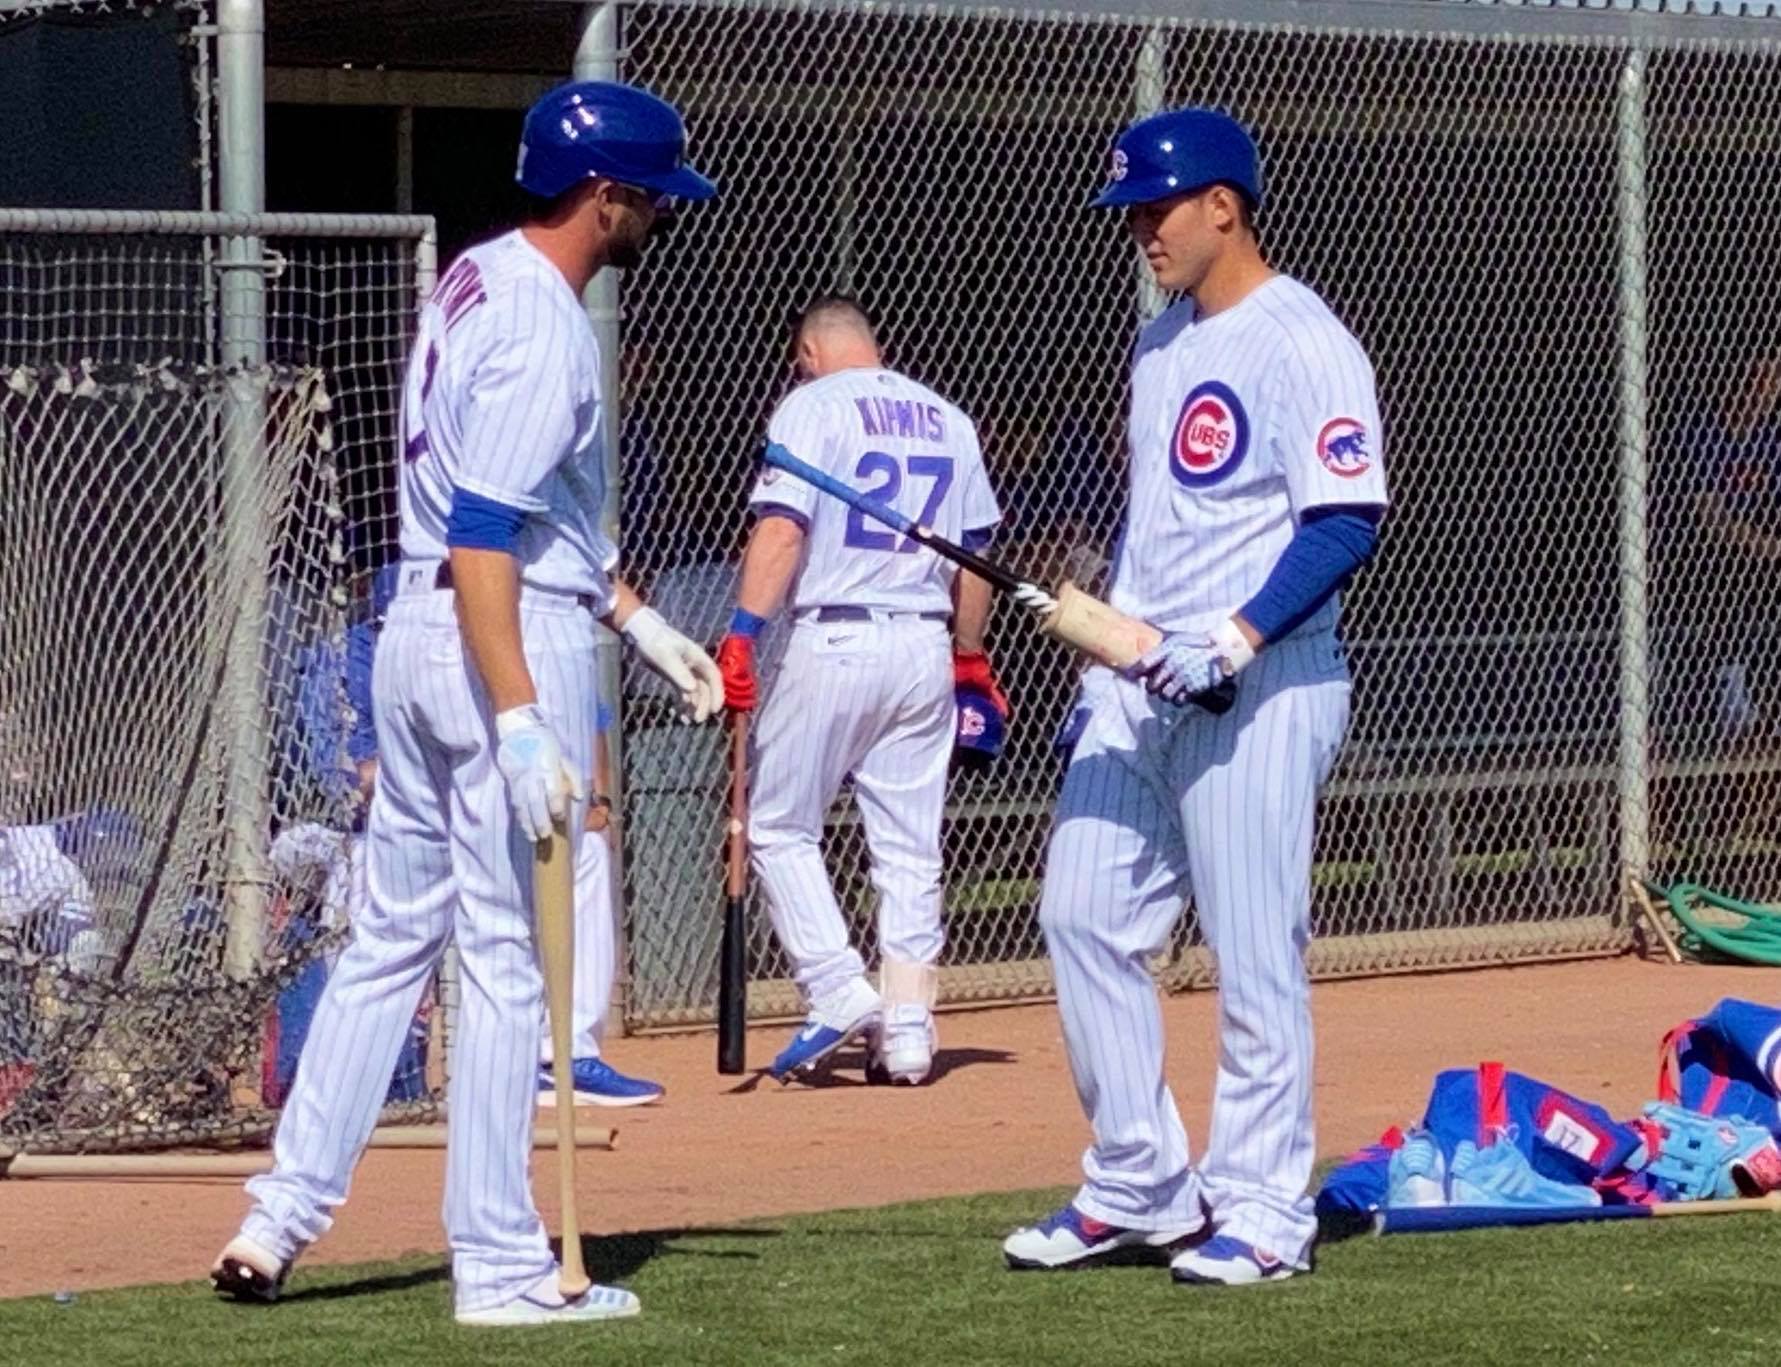 Cubs Baseball Photo of chicago and springtraining and Anthony Rizzo and Kris Bryant